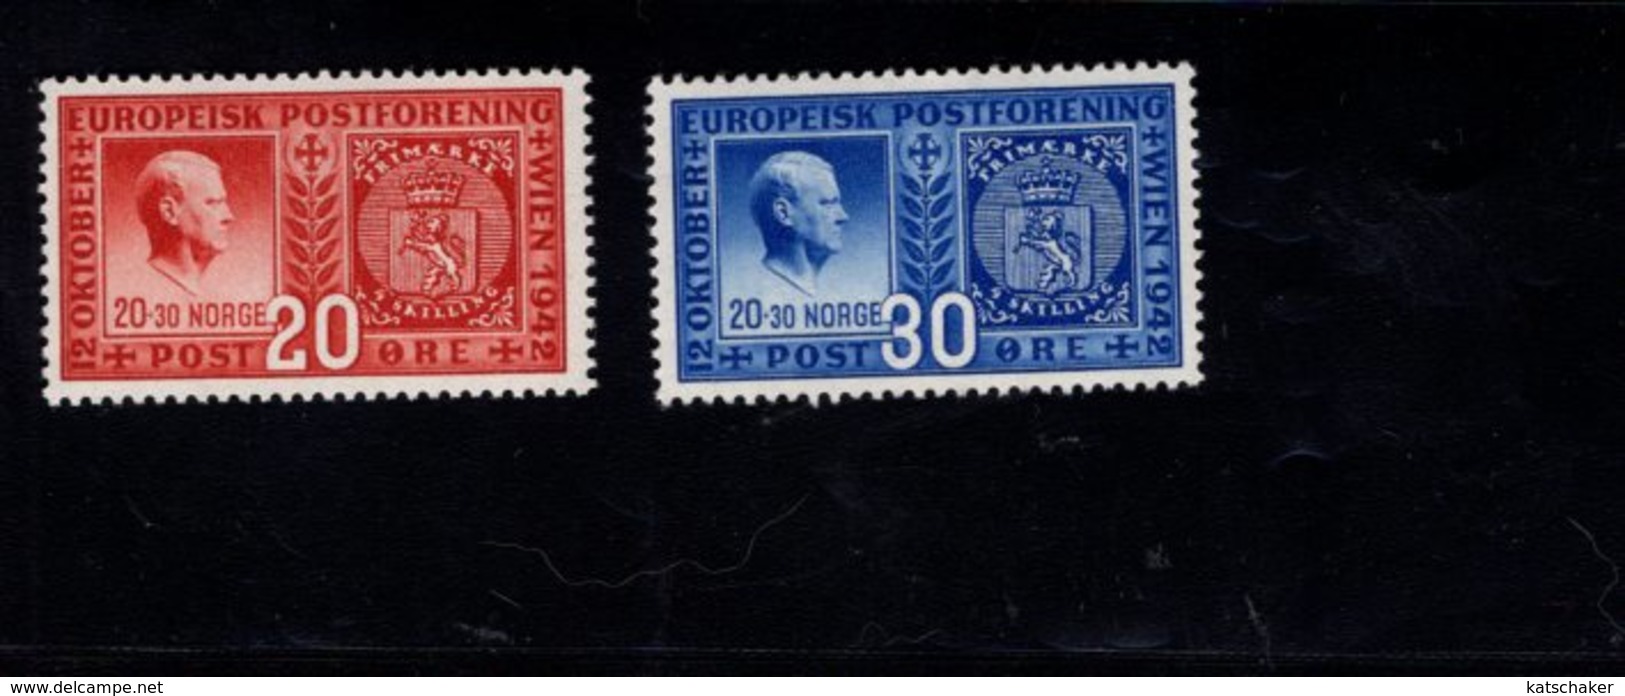 763029581 1942 SCOTT 253 254 POSTFRIS  MINT NEVER HINGED EINWANDFREI  (XX)  DESIGNS OF 1942 AND 1855 STAMPS OF NORWAY - Nuevos